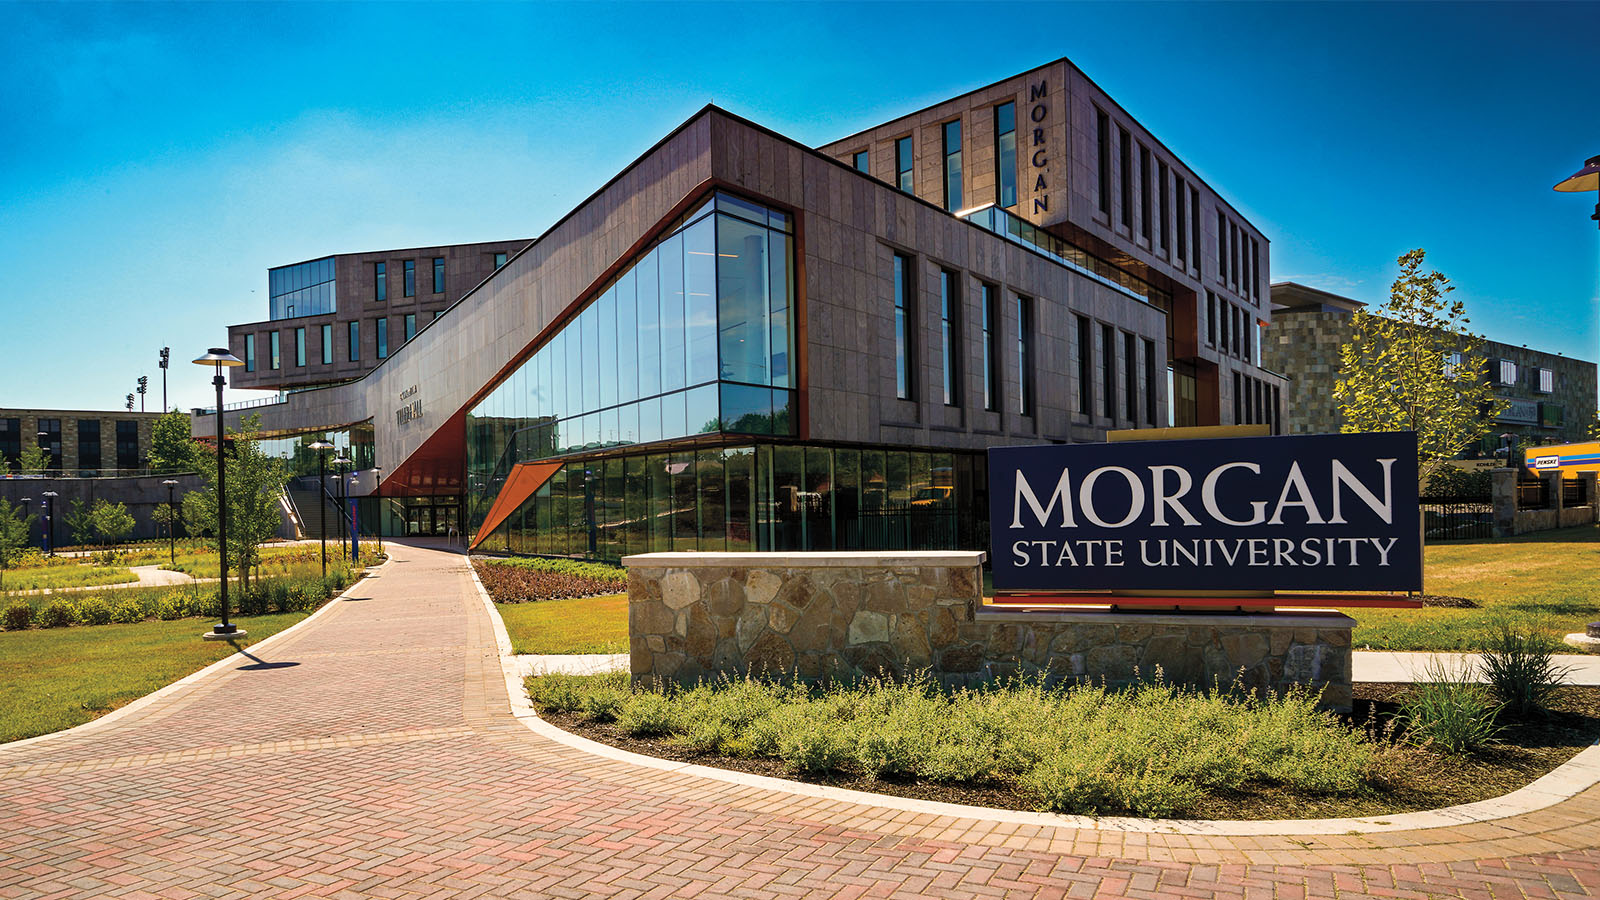 At Morgan State University, a new medical college to open in 2024